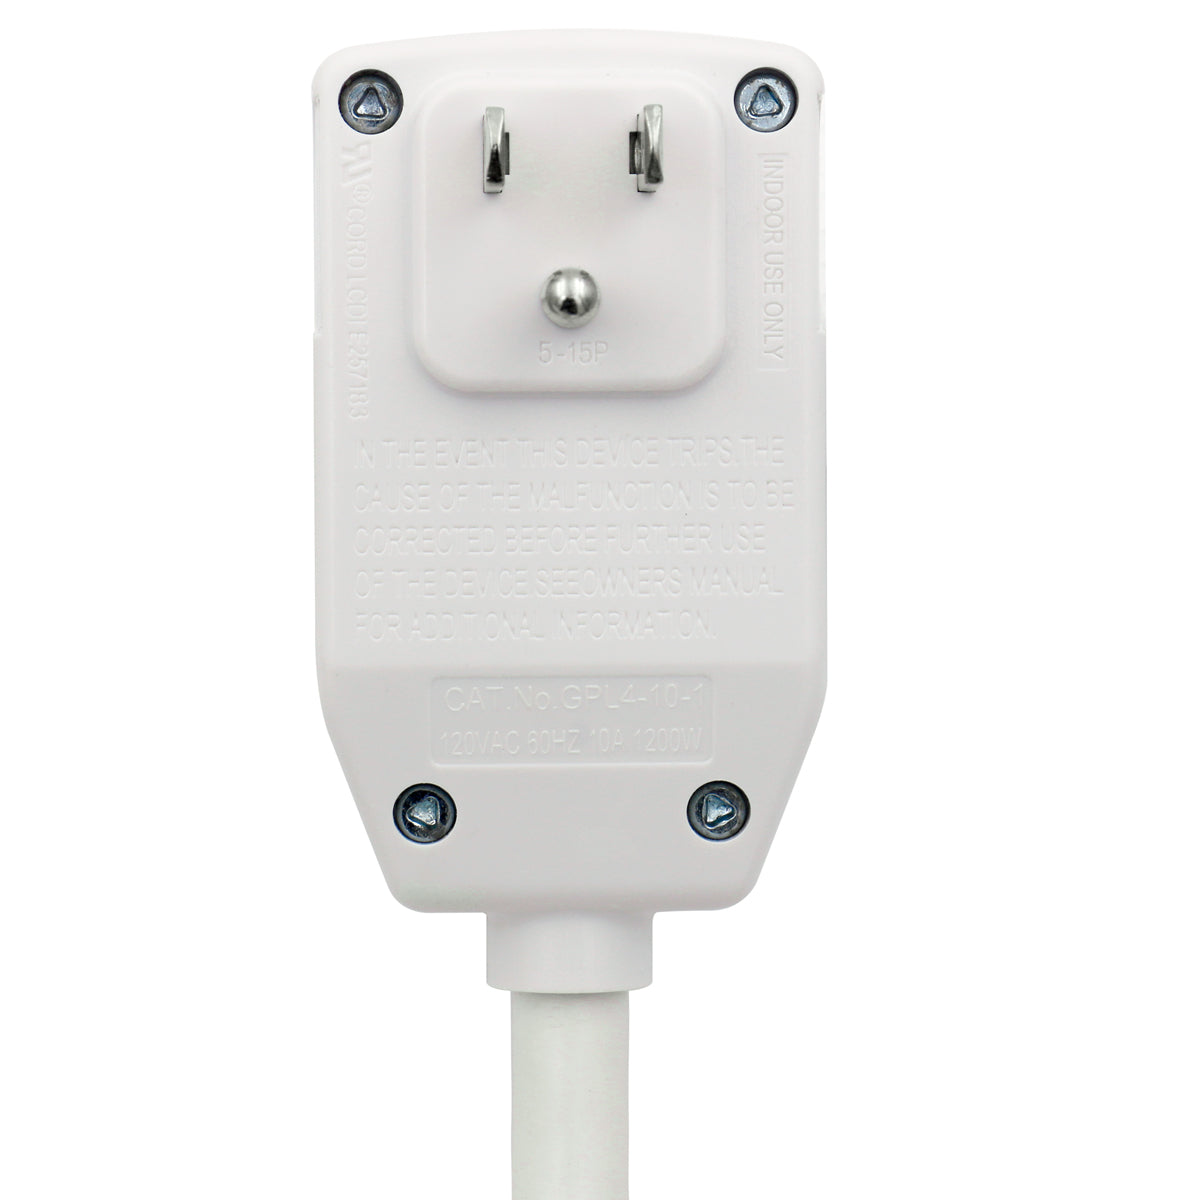 Details about   LCDI Power Cord Plug For Air Condition 120 VAC 10 Amp 1200W 60Hz UL Listed White